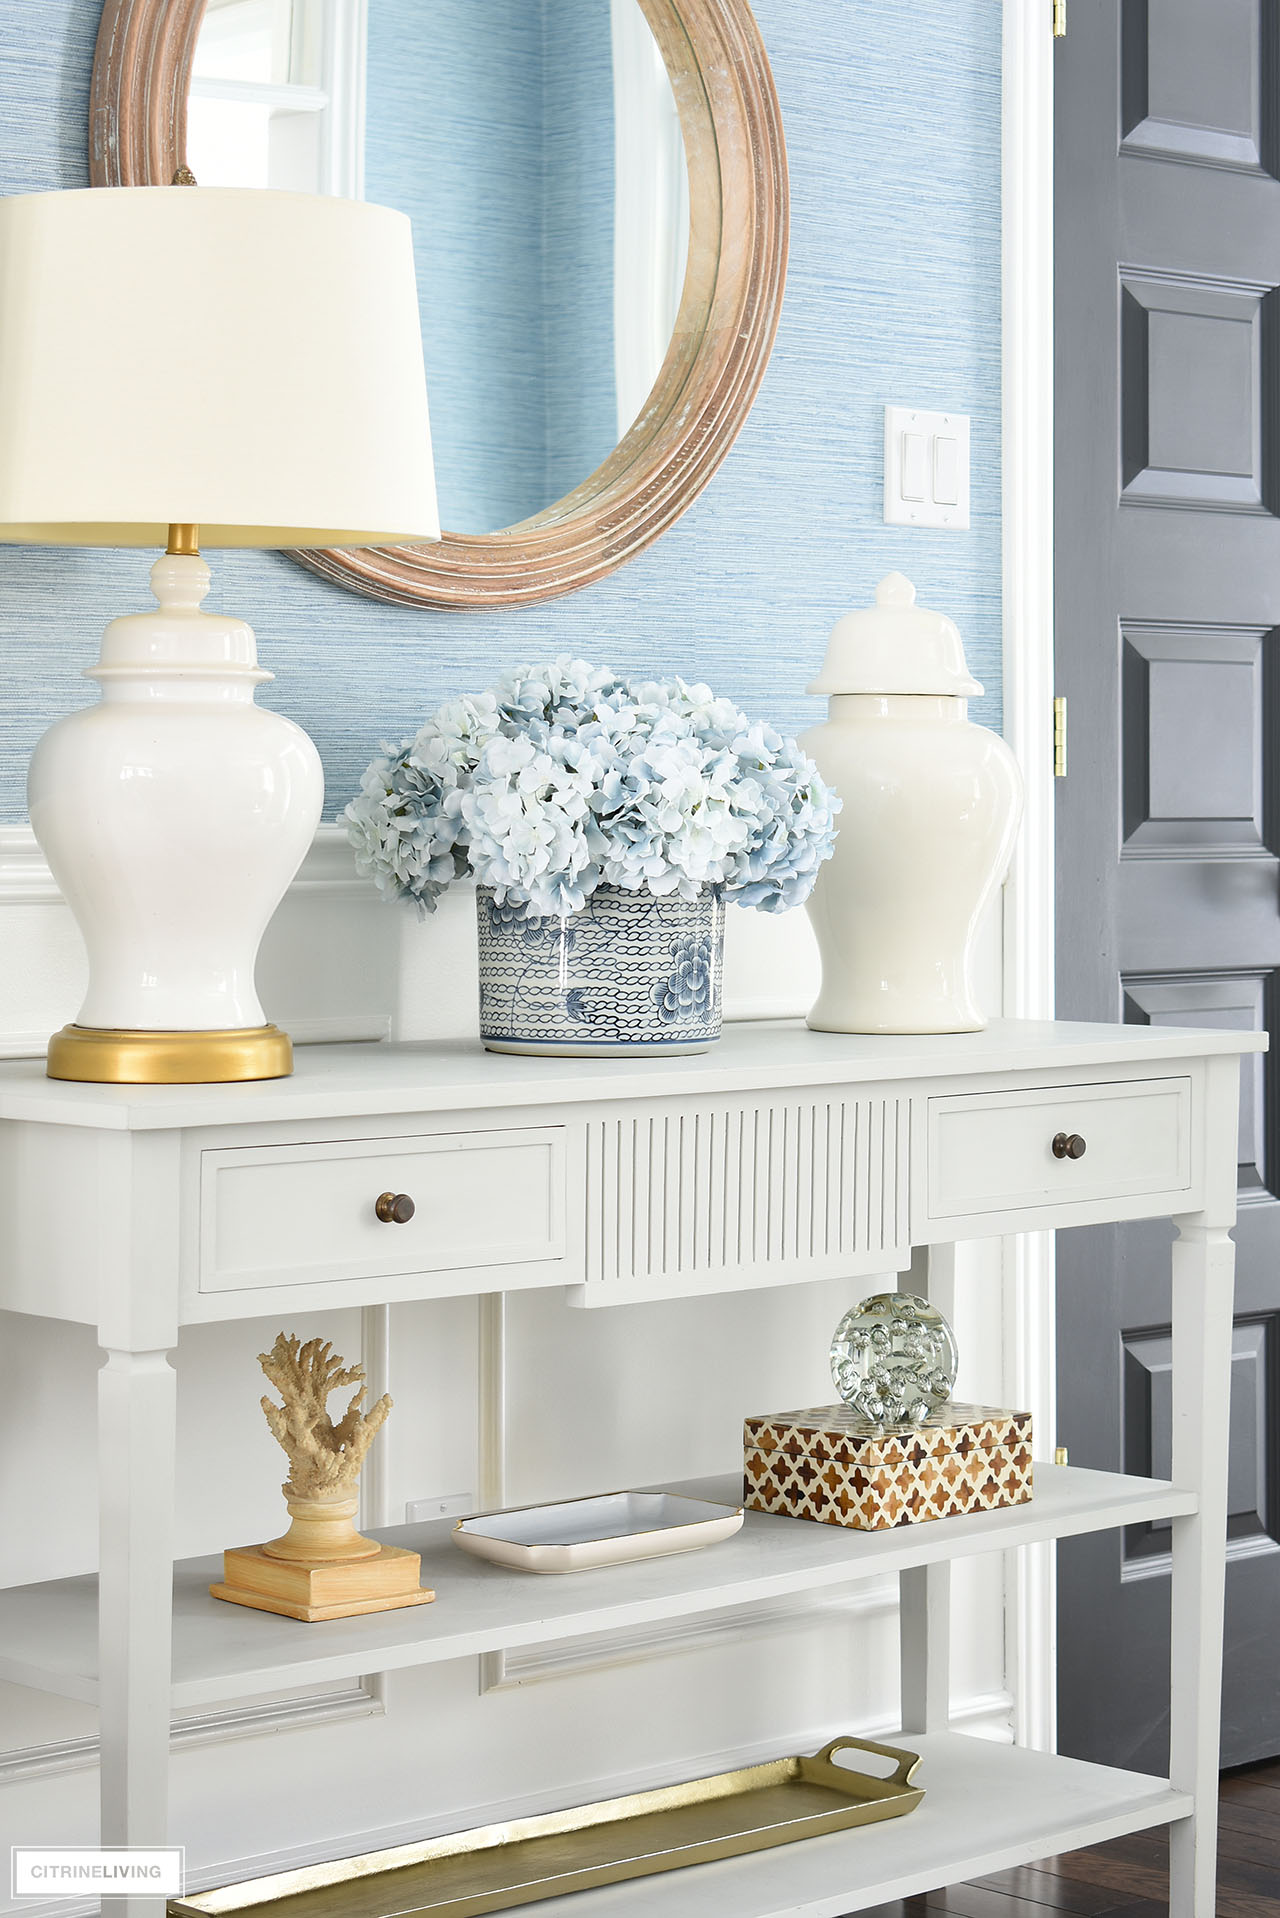 Beautiful entryway spring decor with blue and white accessories styled on a classic console table.